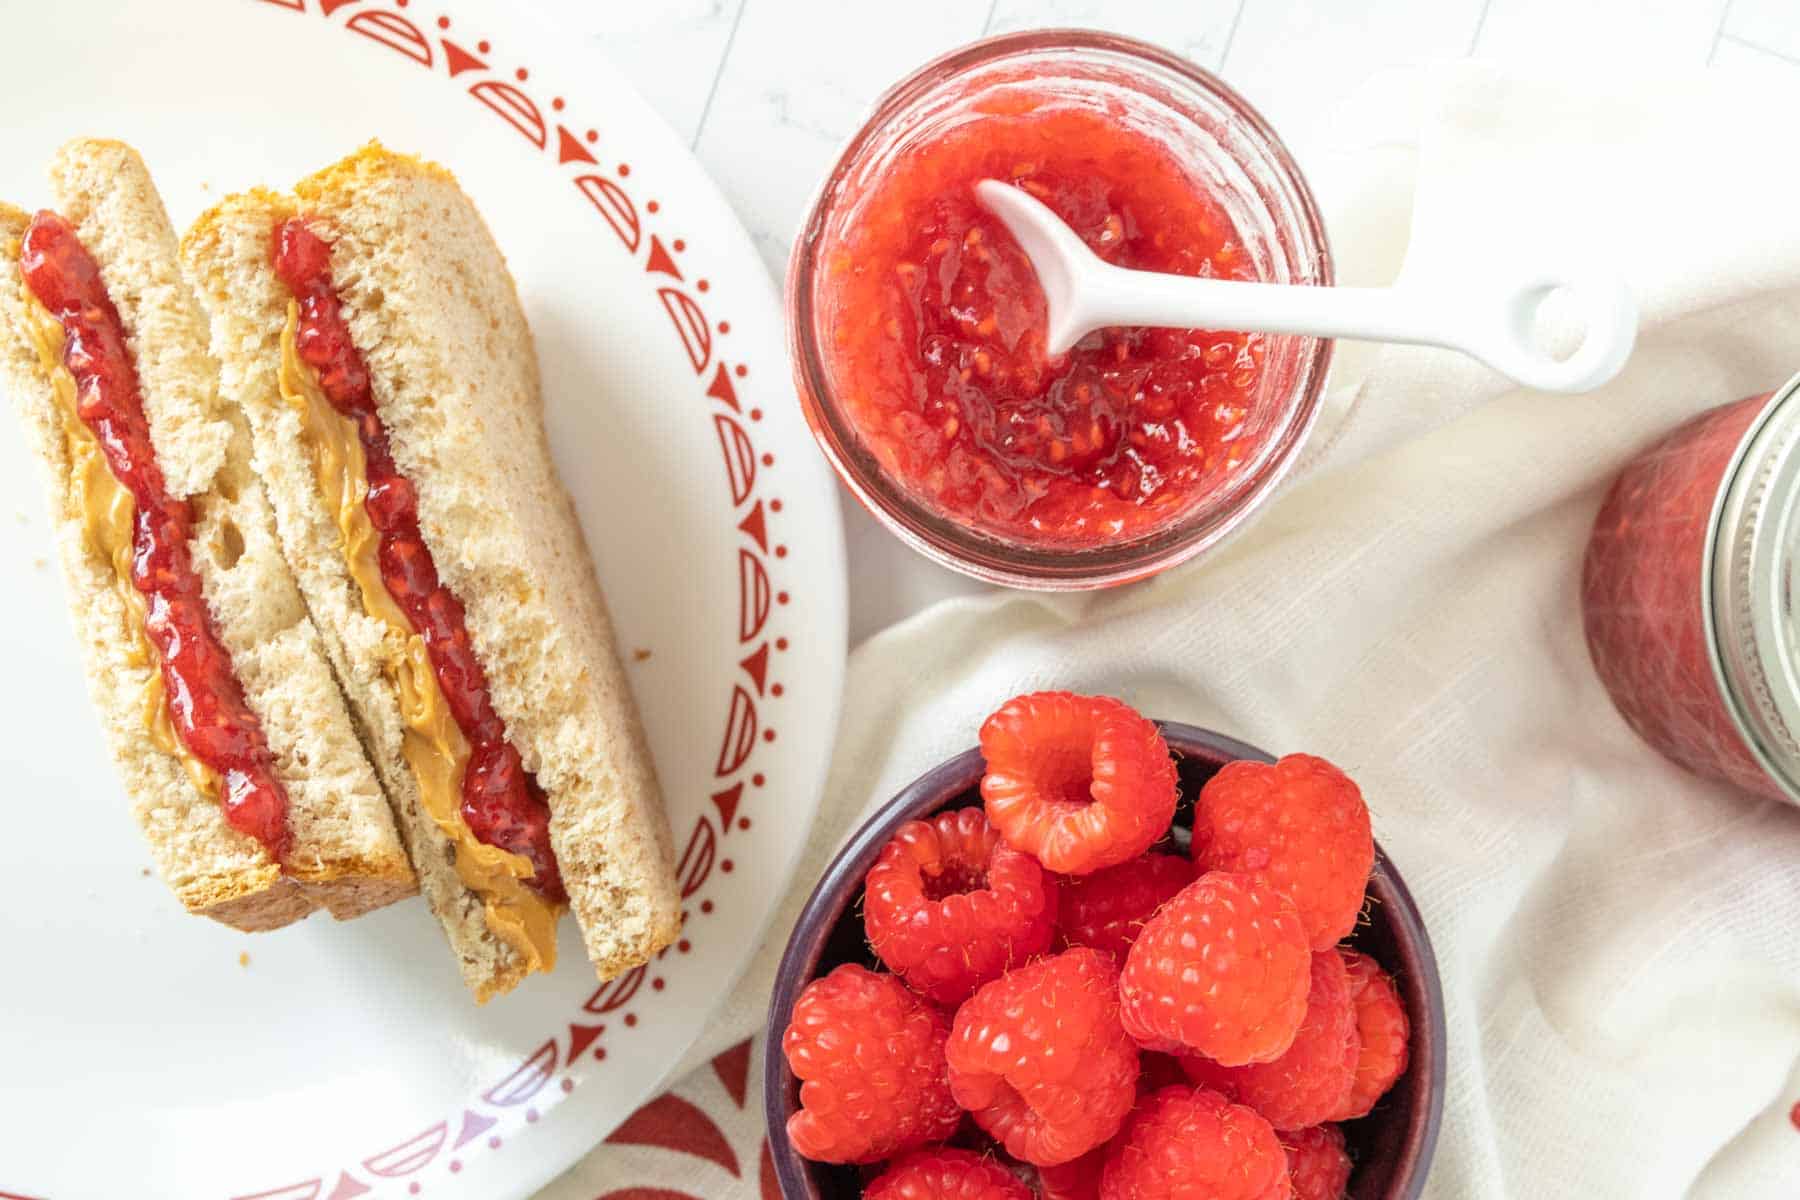 A sandwich with raspberry jam and raspberries on a plate.